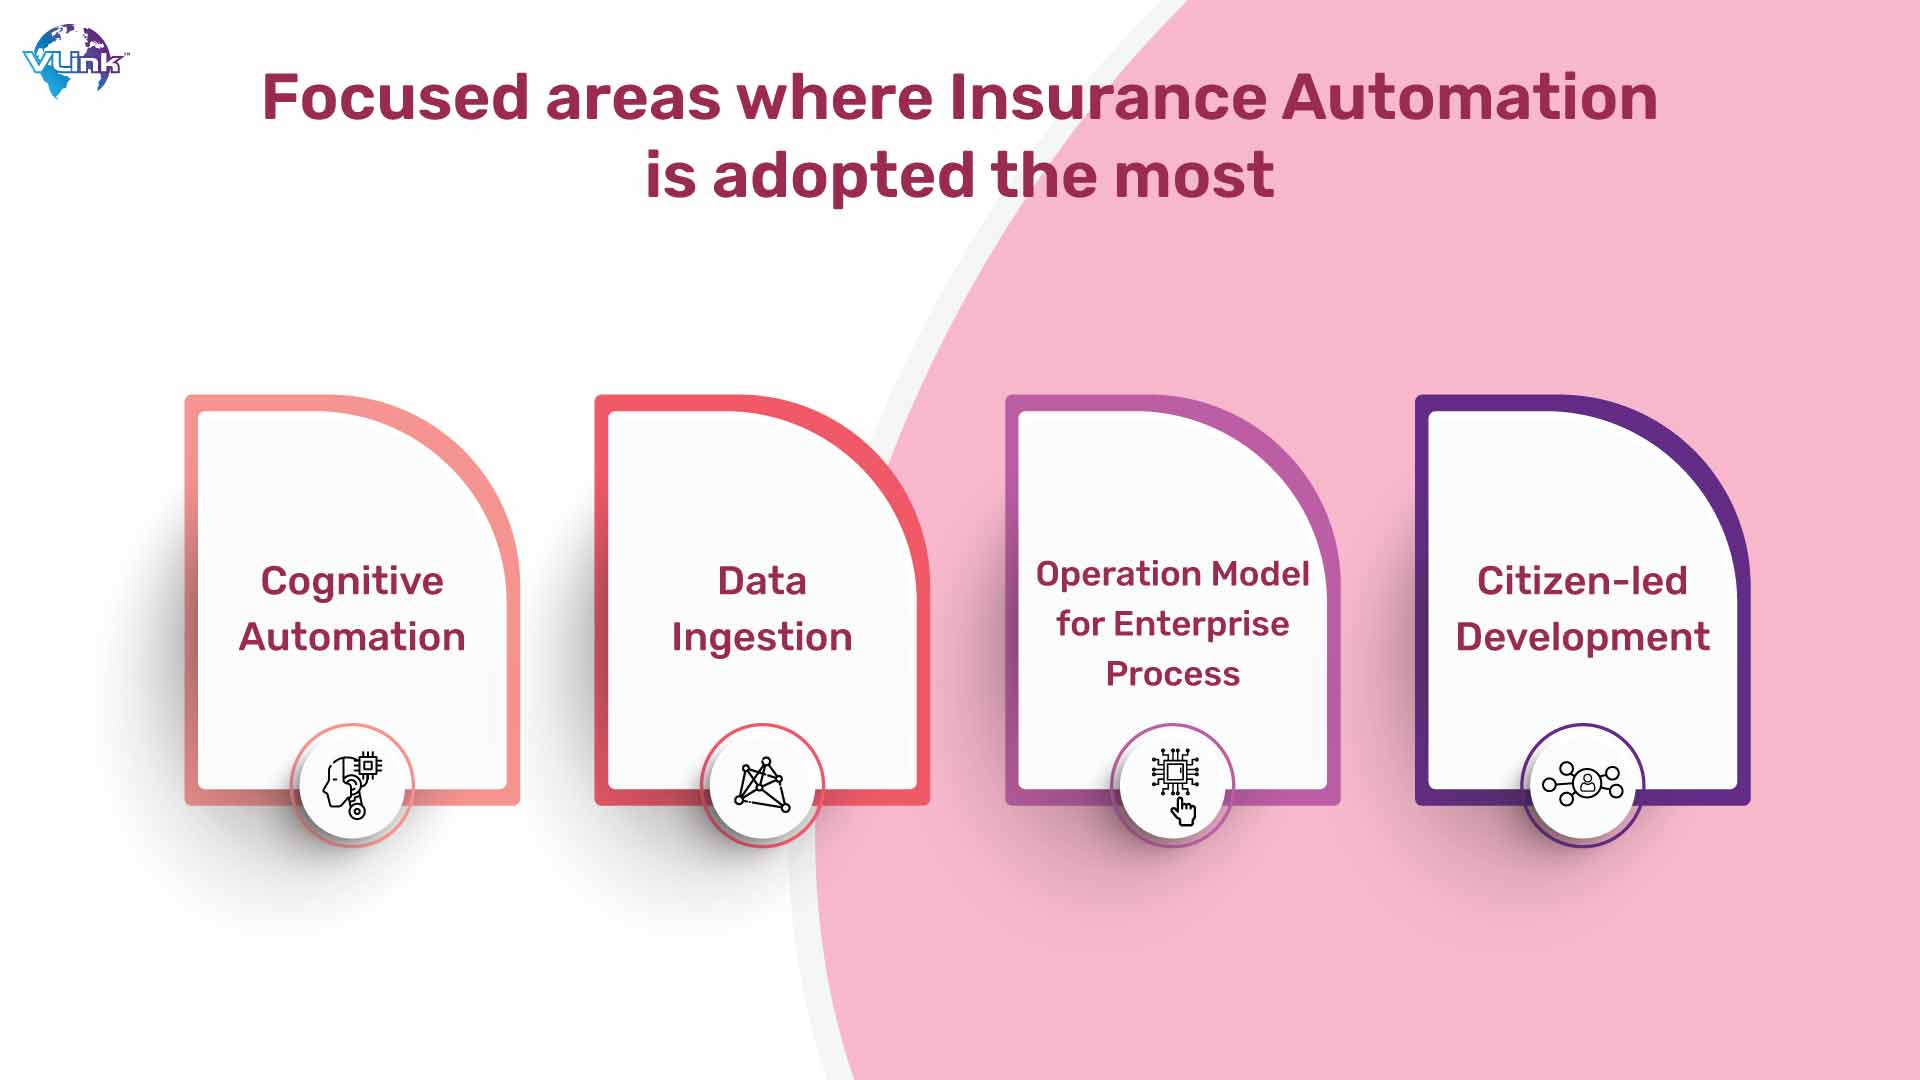 Focused areas where insurance automation is adopted the most